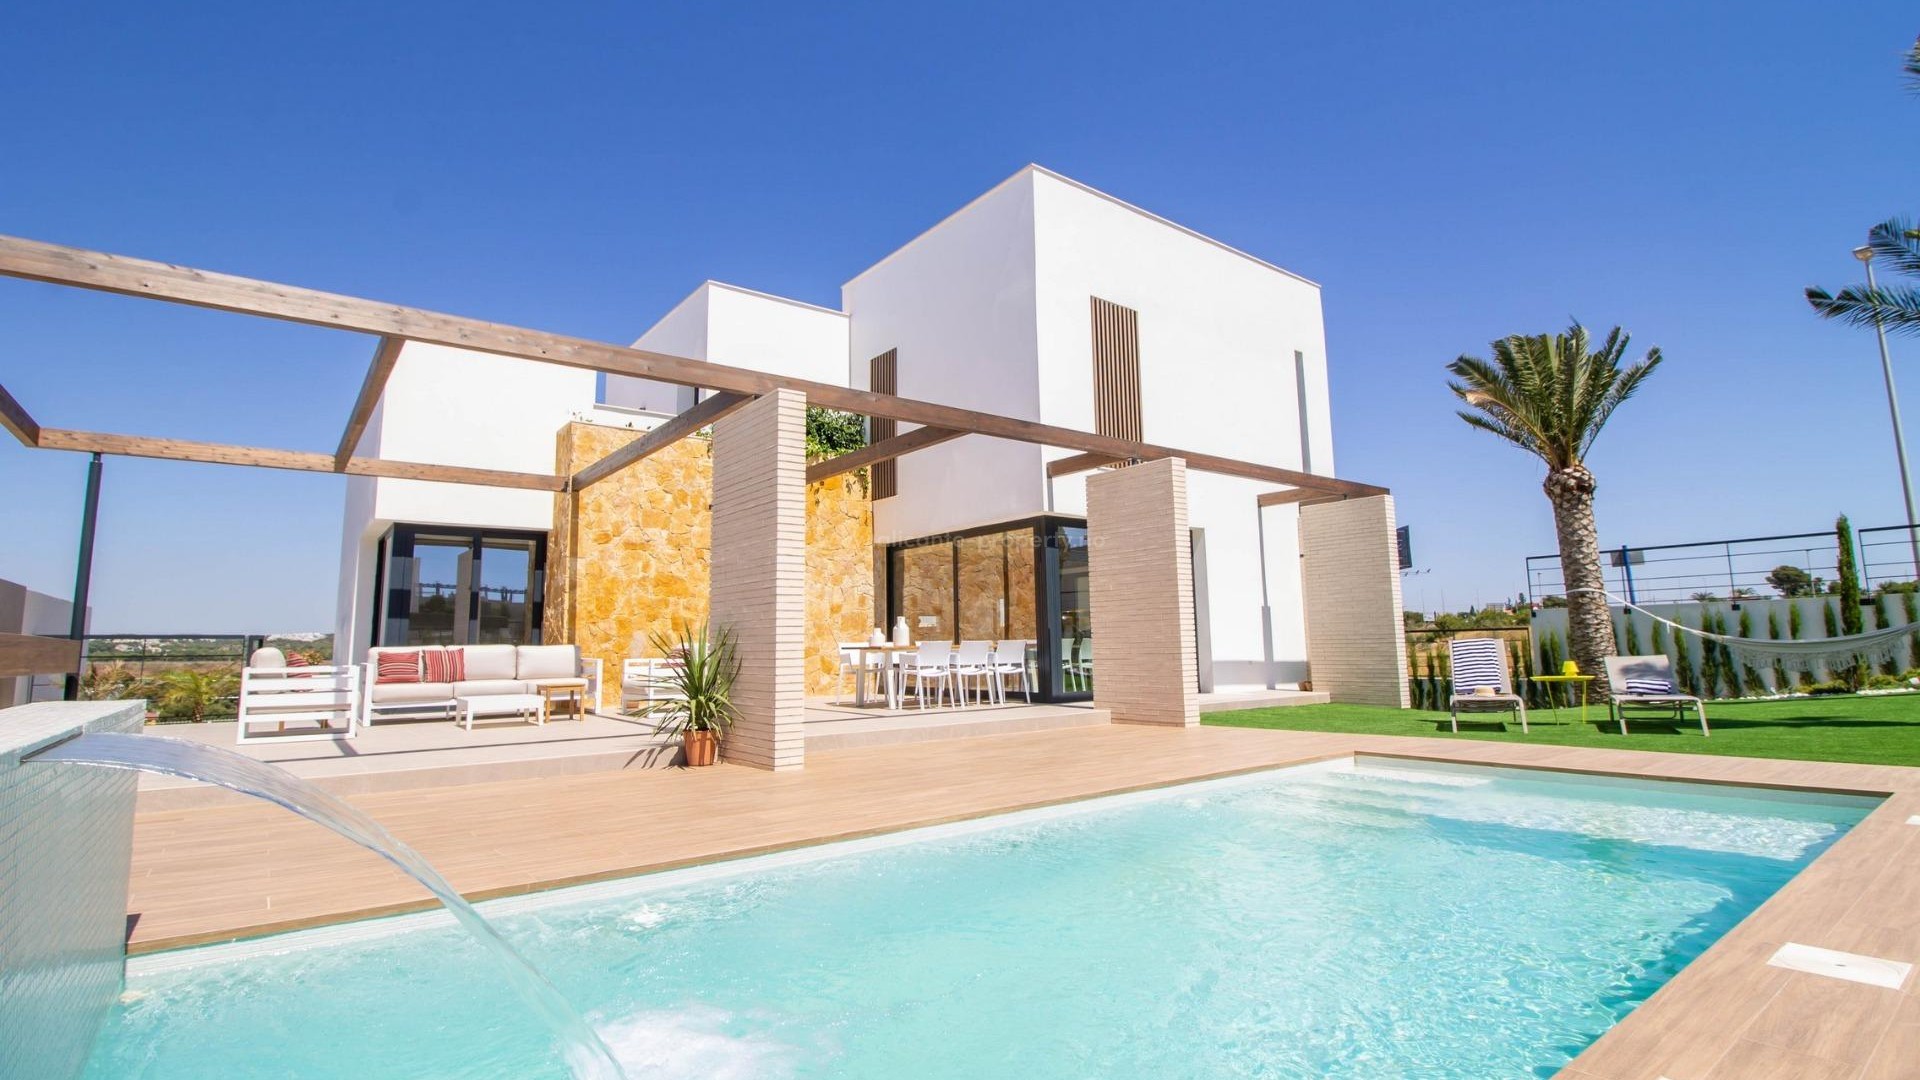 Luxury villa on the beach (2 min) in Campoamor on the Orihuela Costa, 4 bedrooms and 4 bathrooms, large plot to enjoy the garden and private pool. All services close